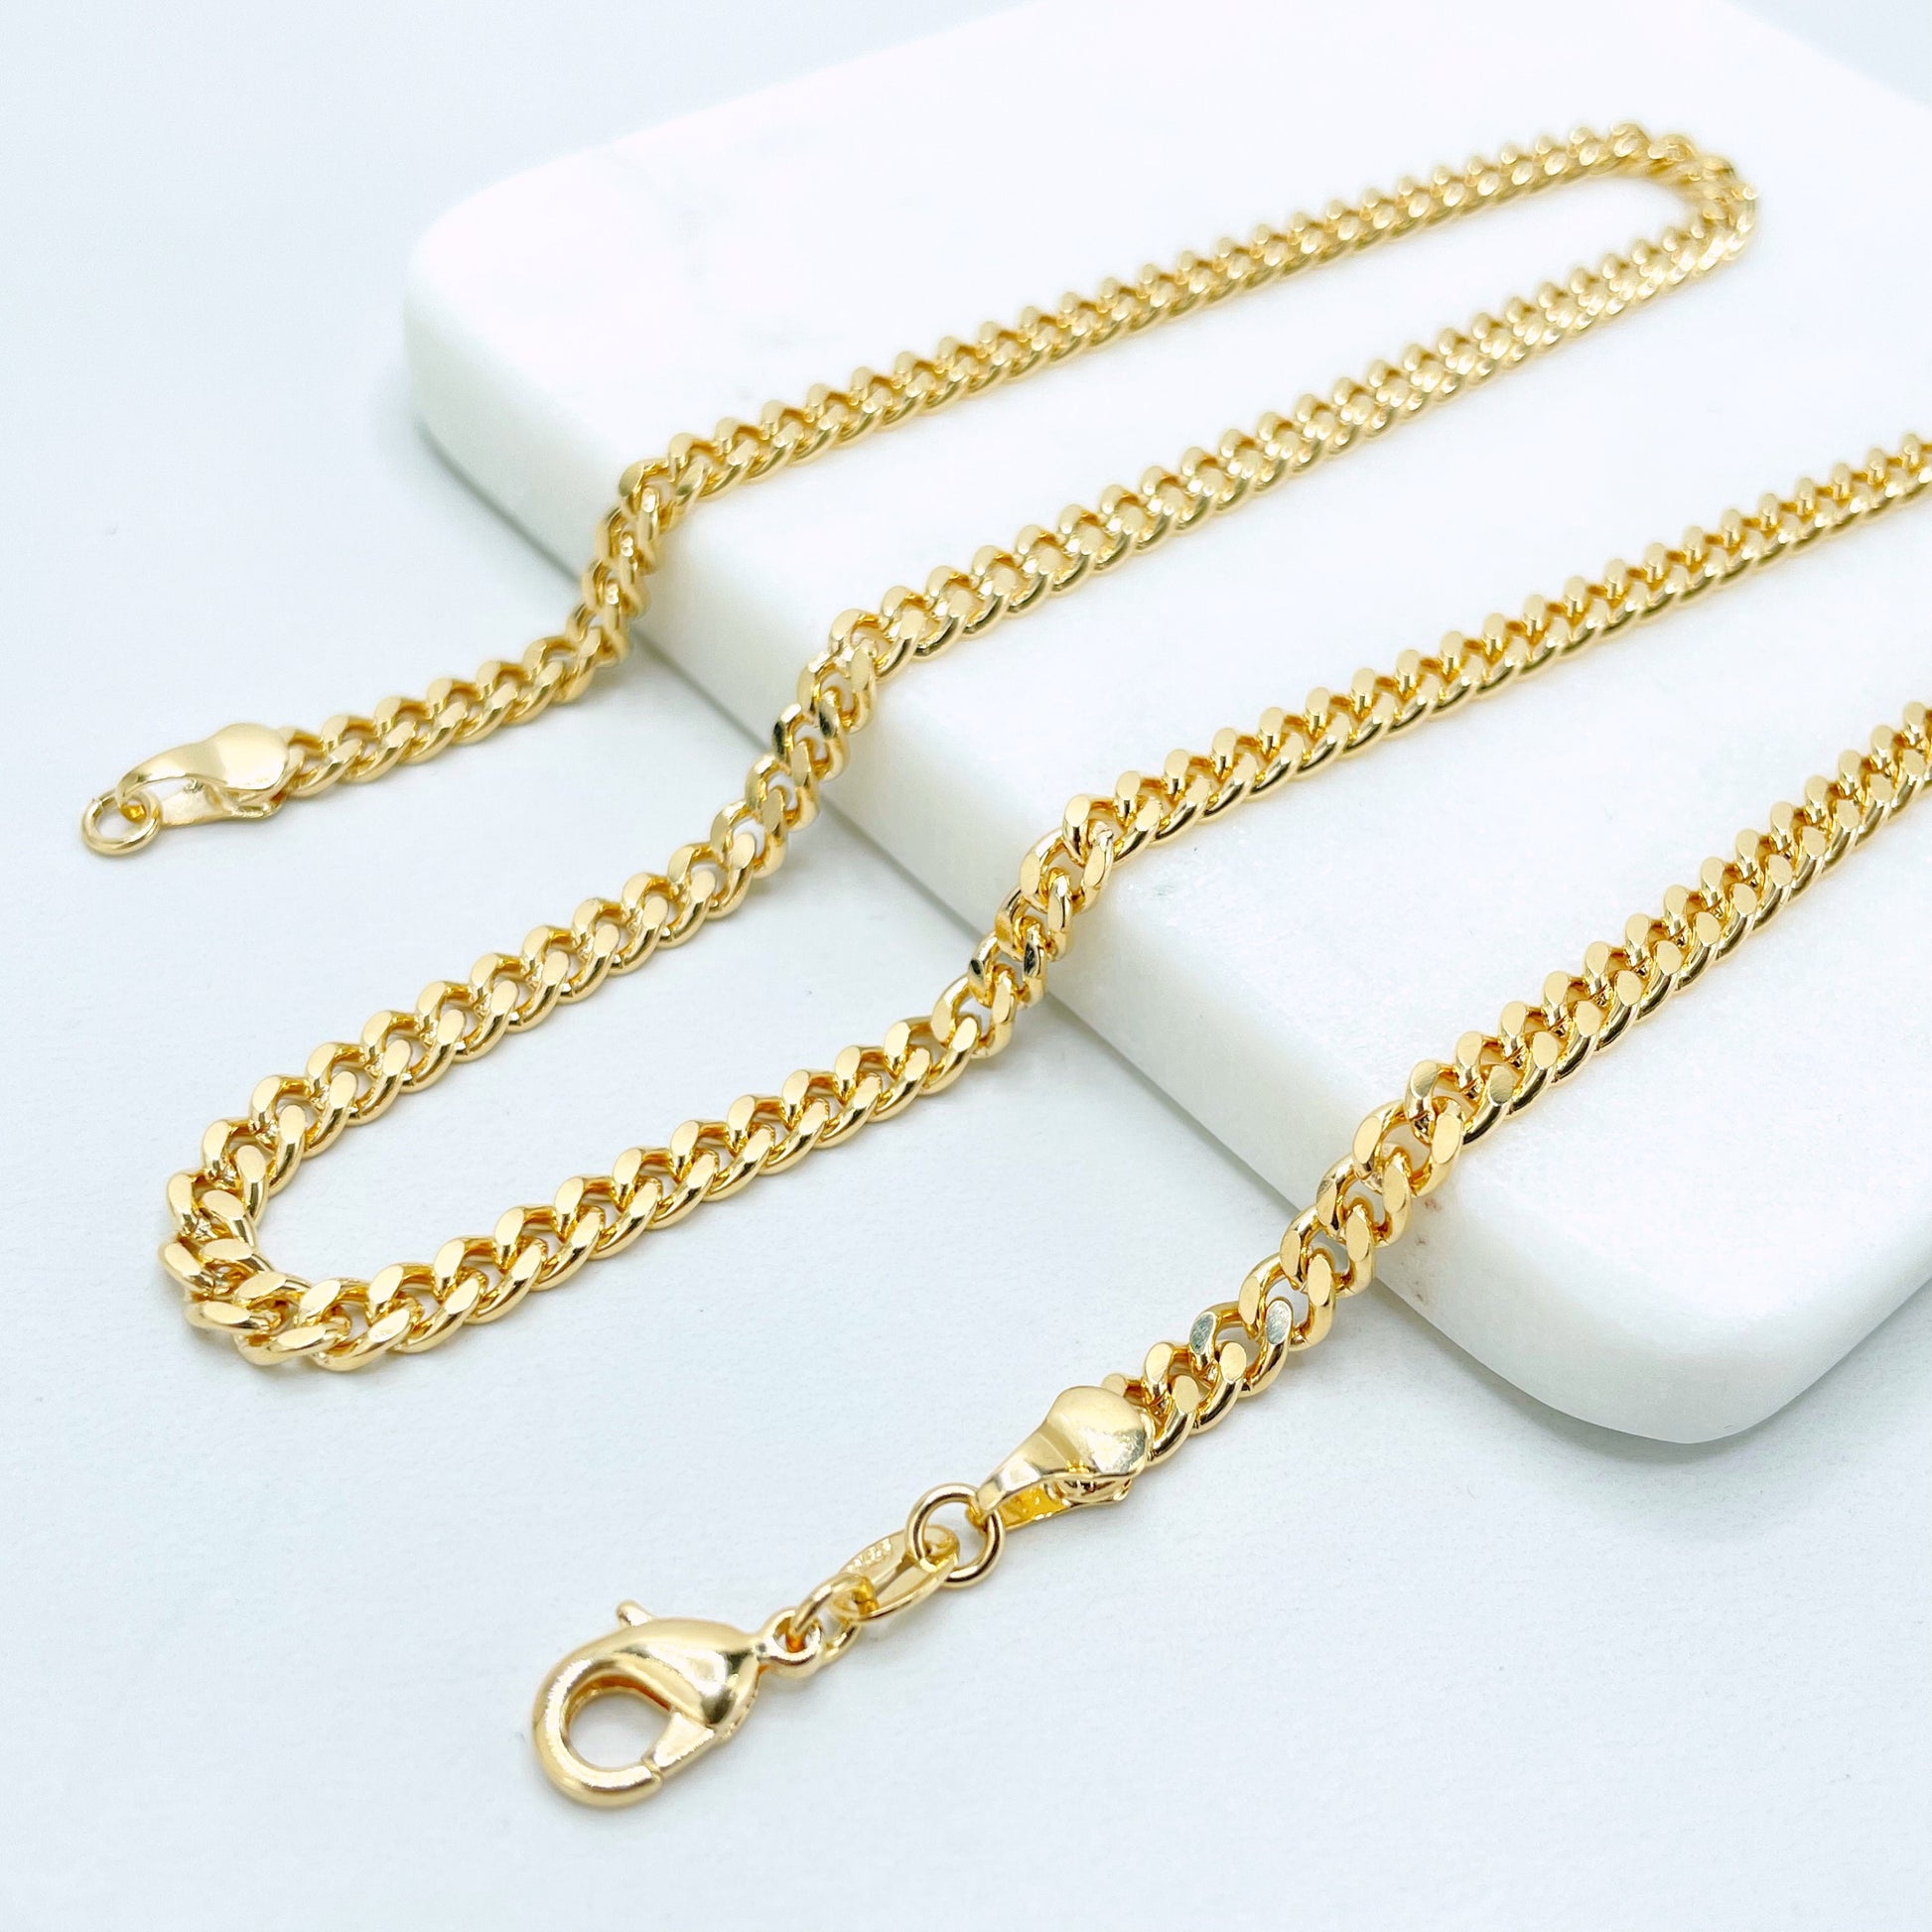 18k Gold Filled Miami Cuban Link Chain 4mm Thickness, Unisex Curb Link Chain, Wholesale Jewelry Making Supplies